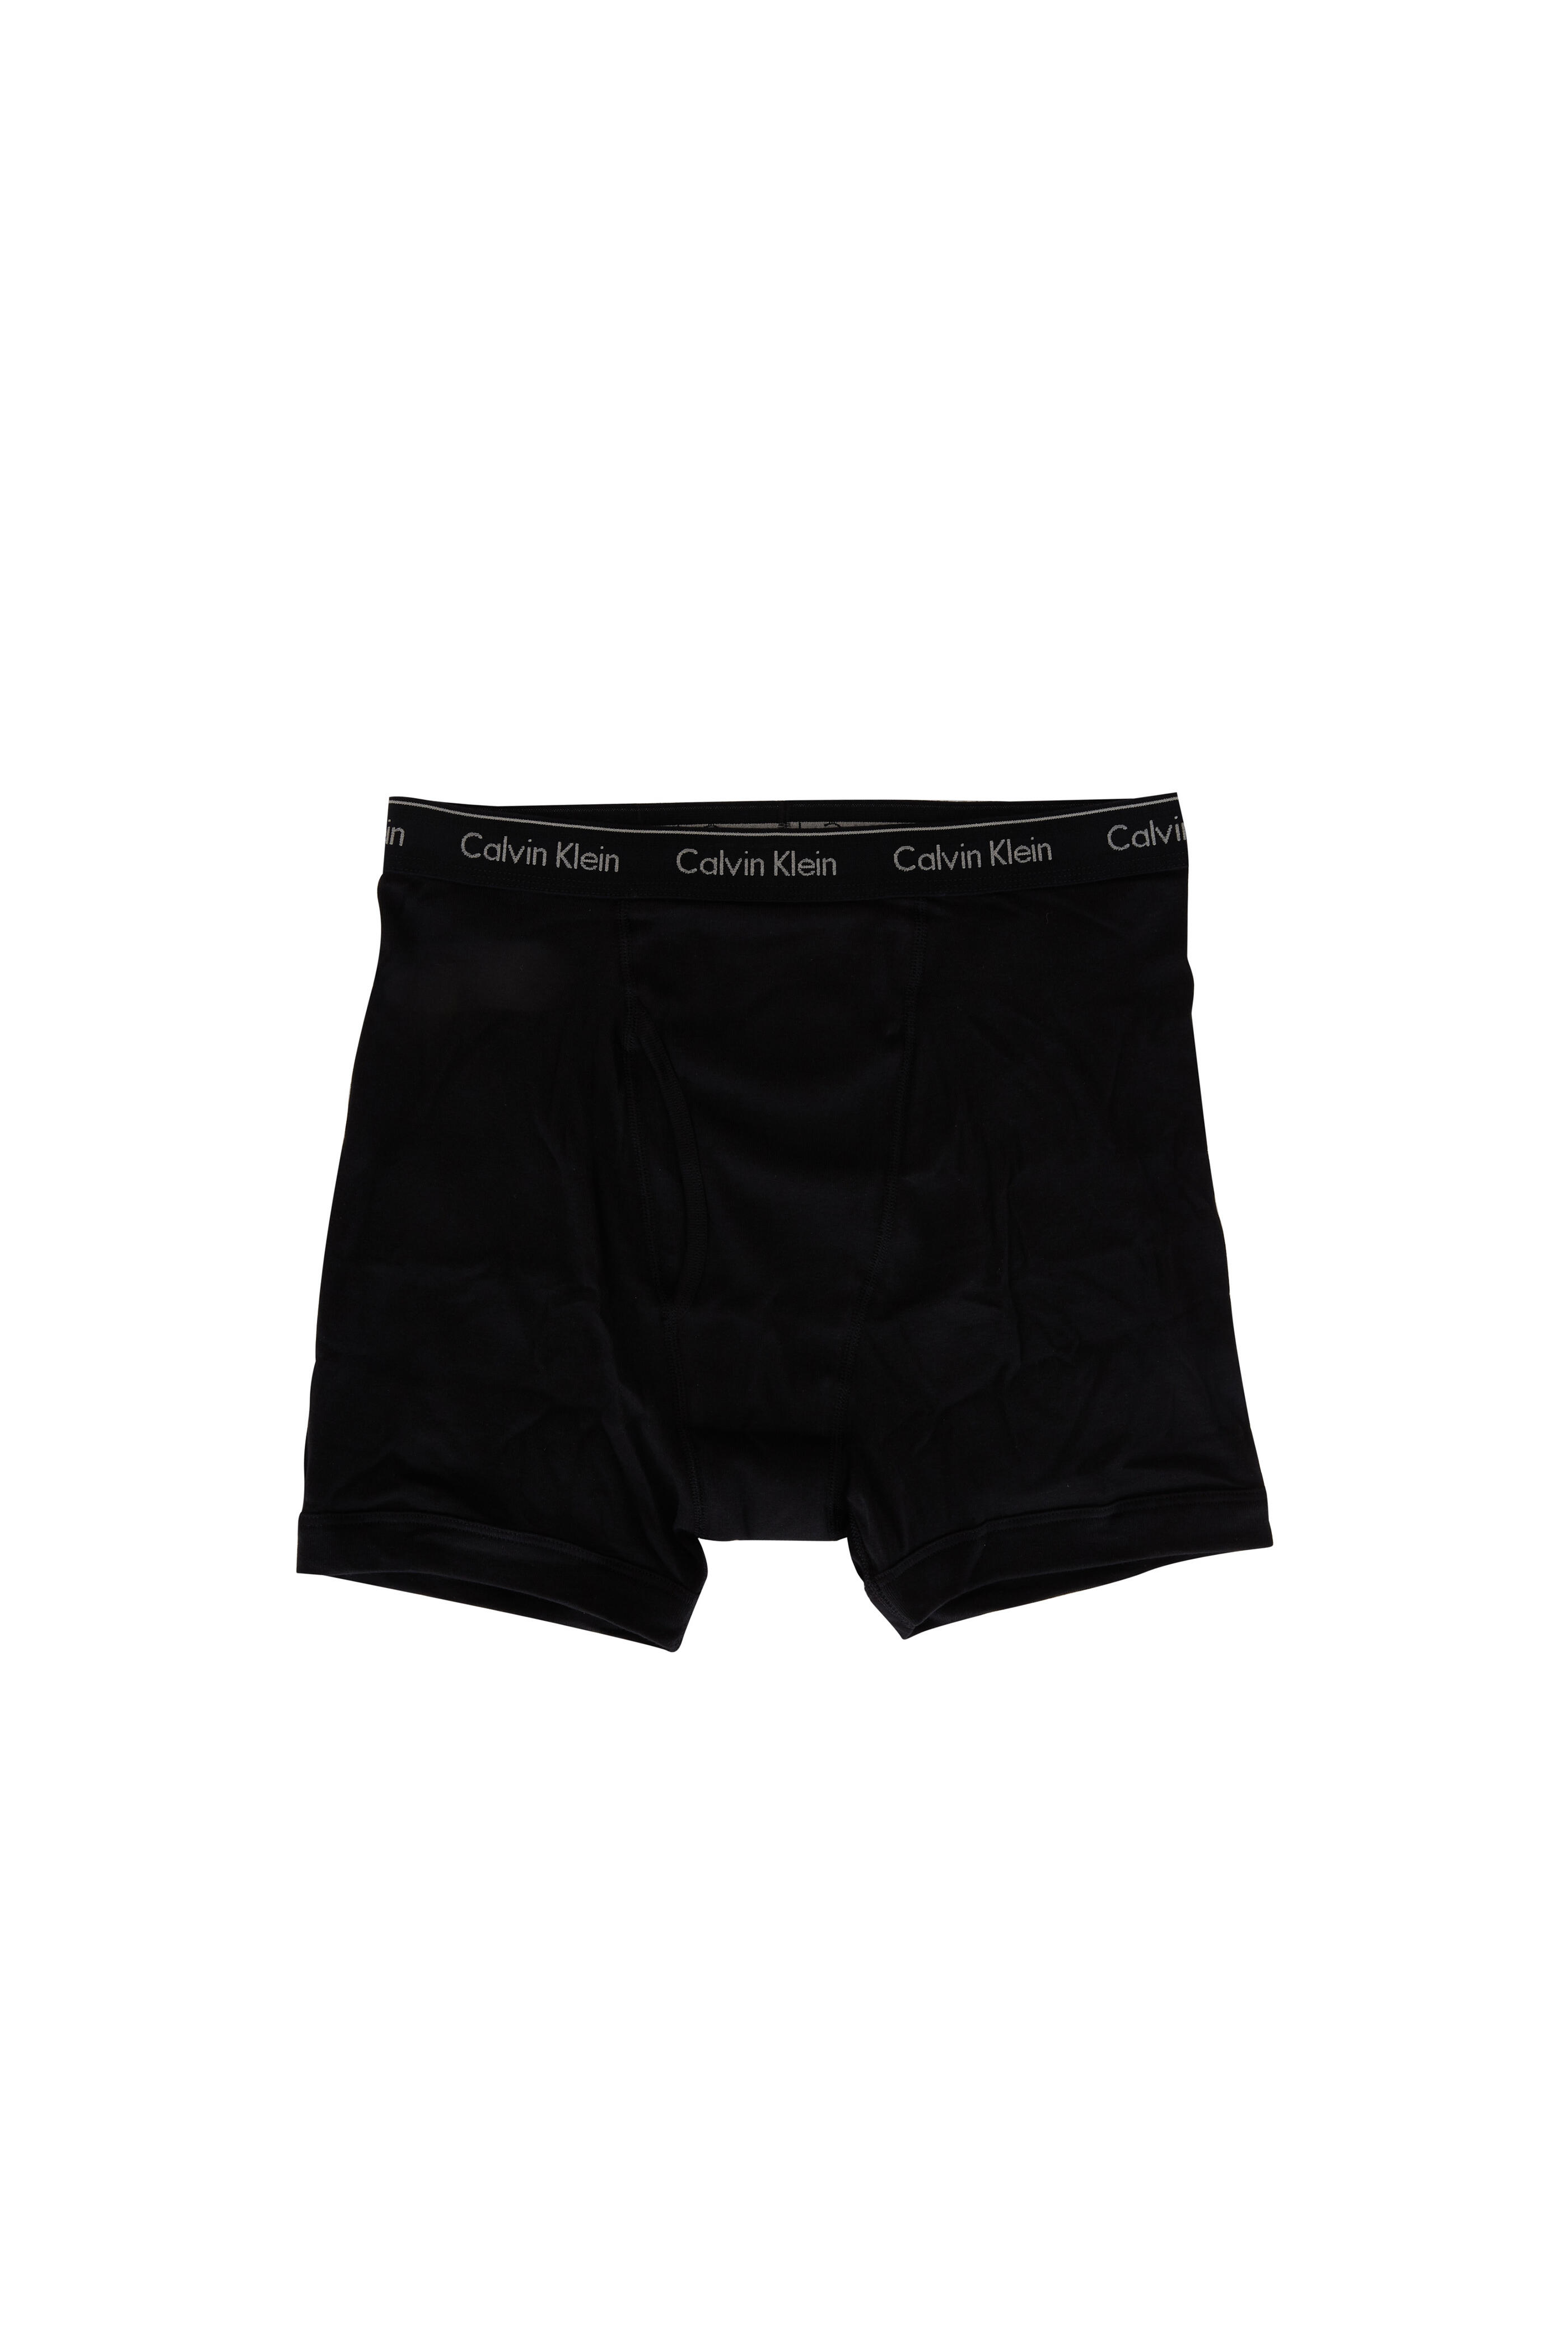 Calvin Klein Girls Black & White Knickers (2 Pack) | Junior Couture USA